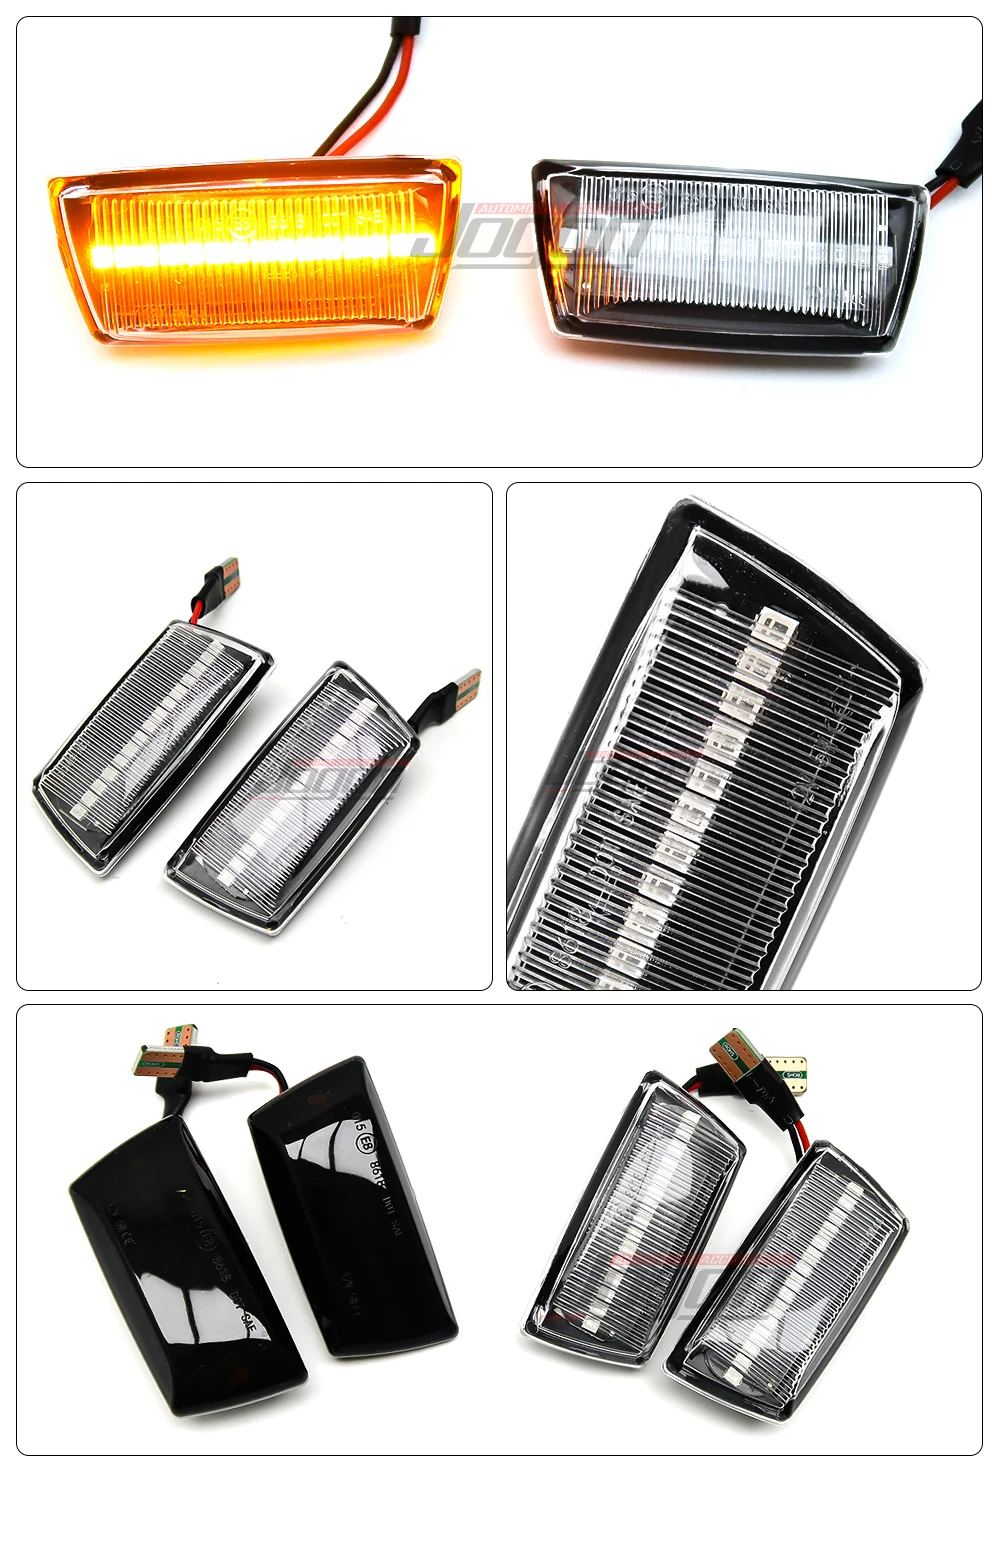 Wholesale For Chevrolet Cruze J300 Aveo T300 Orlando For Cadillac BLS Led  Dynamic Turn Signal Light Side Fender Marker Sequential Blinker From  m.alibaba.com